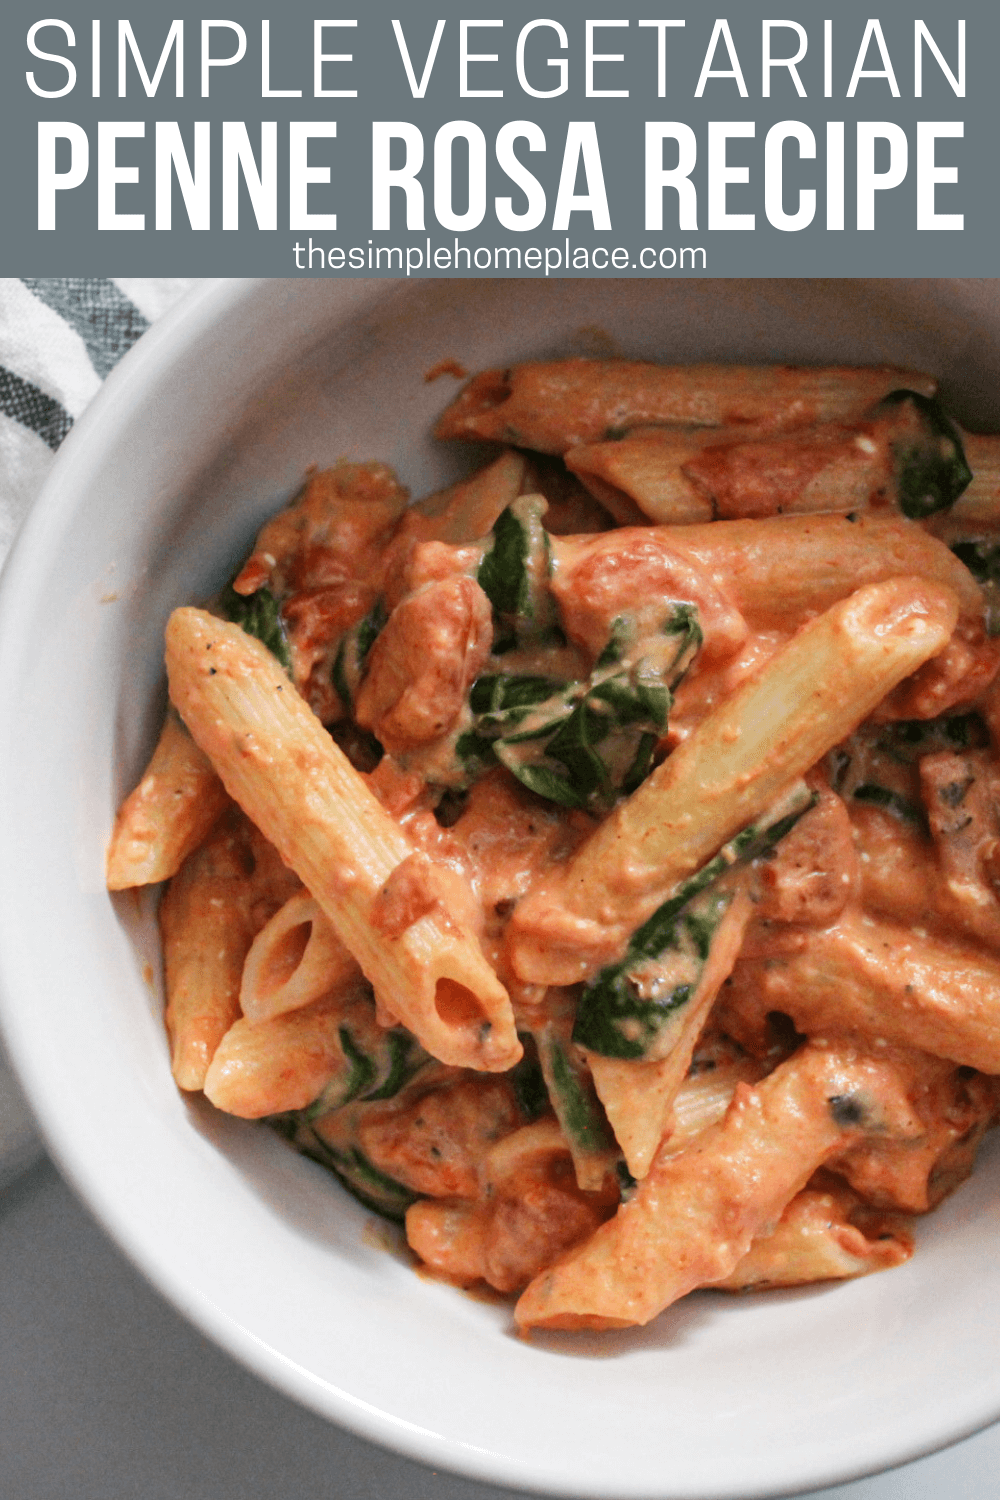 penne rosa